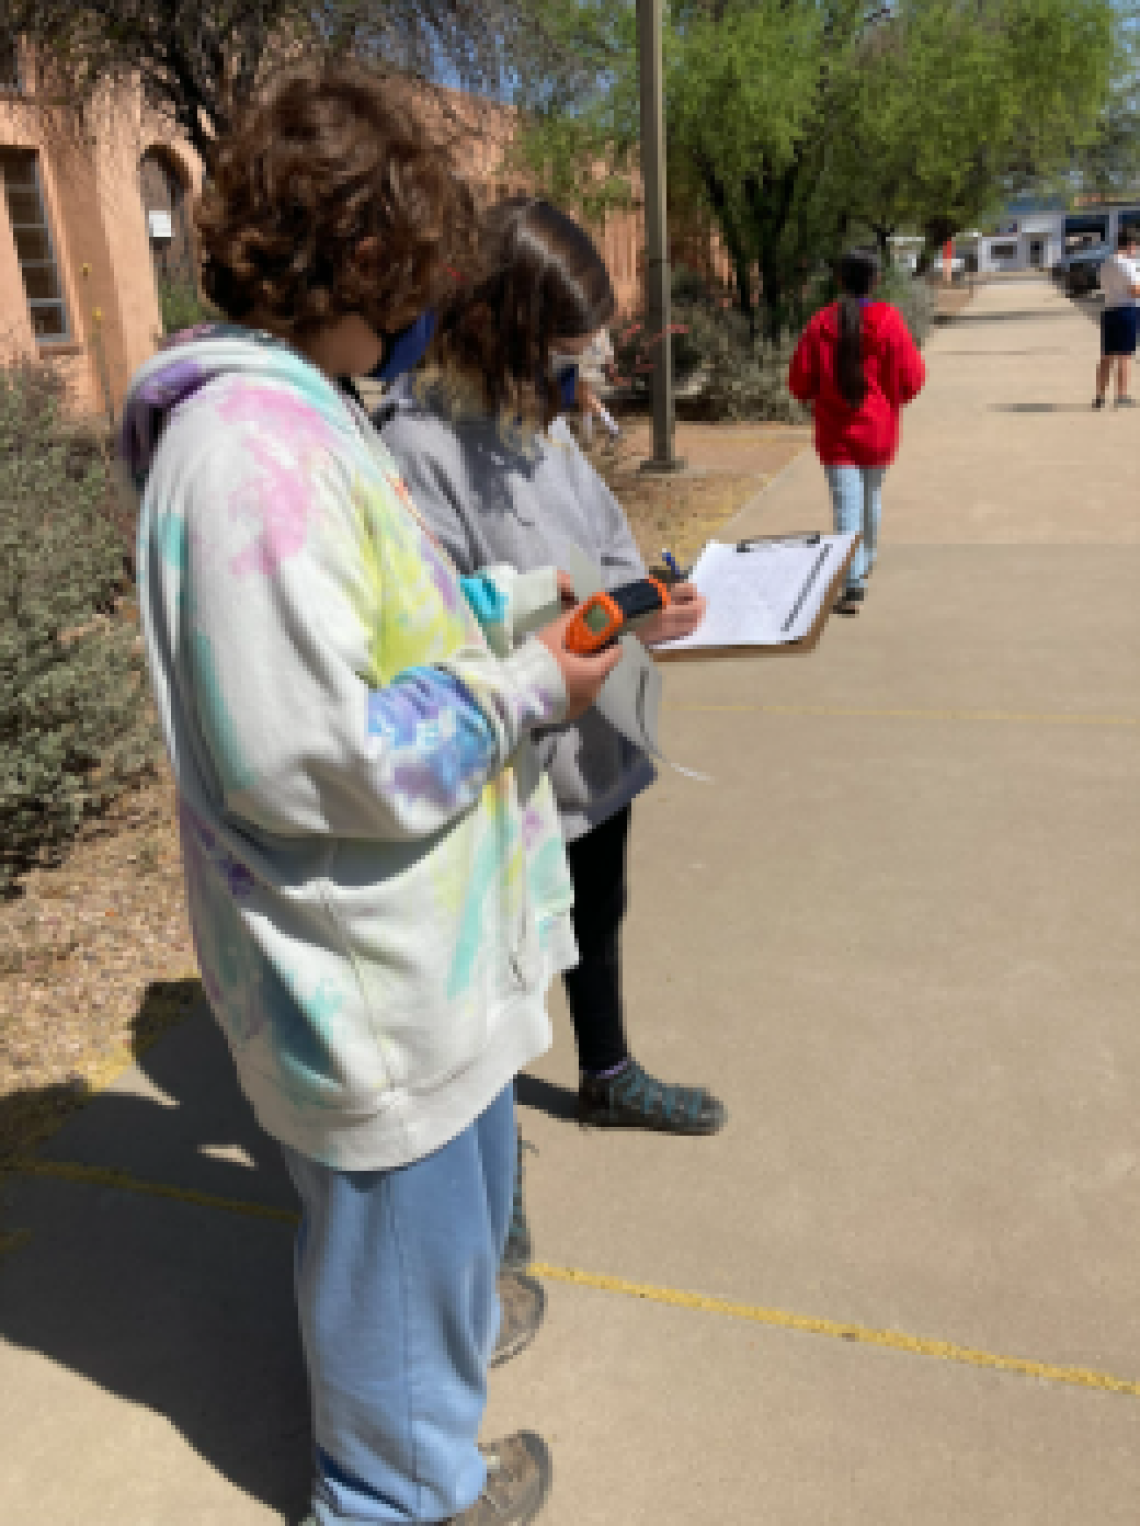 Image shows two students standing on a walkway. The student closest to the camera is wearing a tie-dye hoodie and is holding a thermometer. The student farthest from the camera is wearing a grey sweatshirt and is writing on a piece of paper that is on a clipboard.